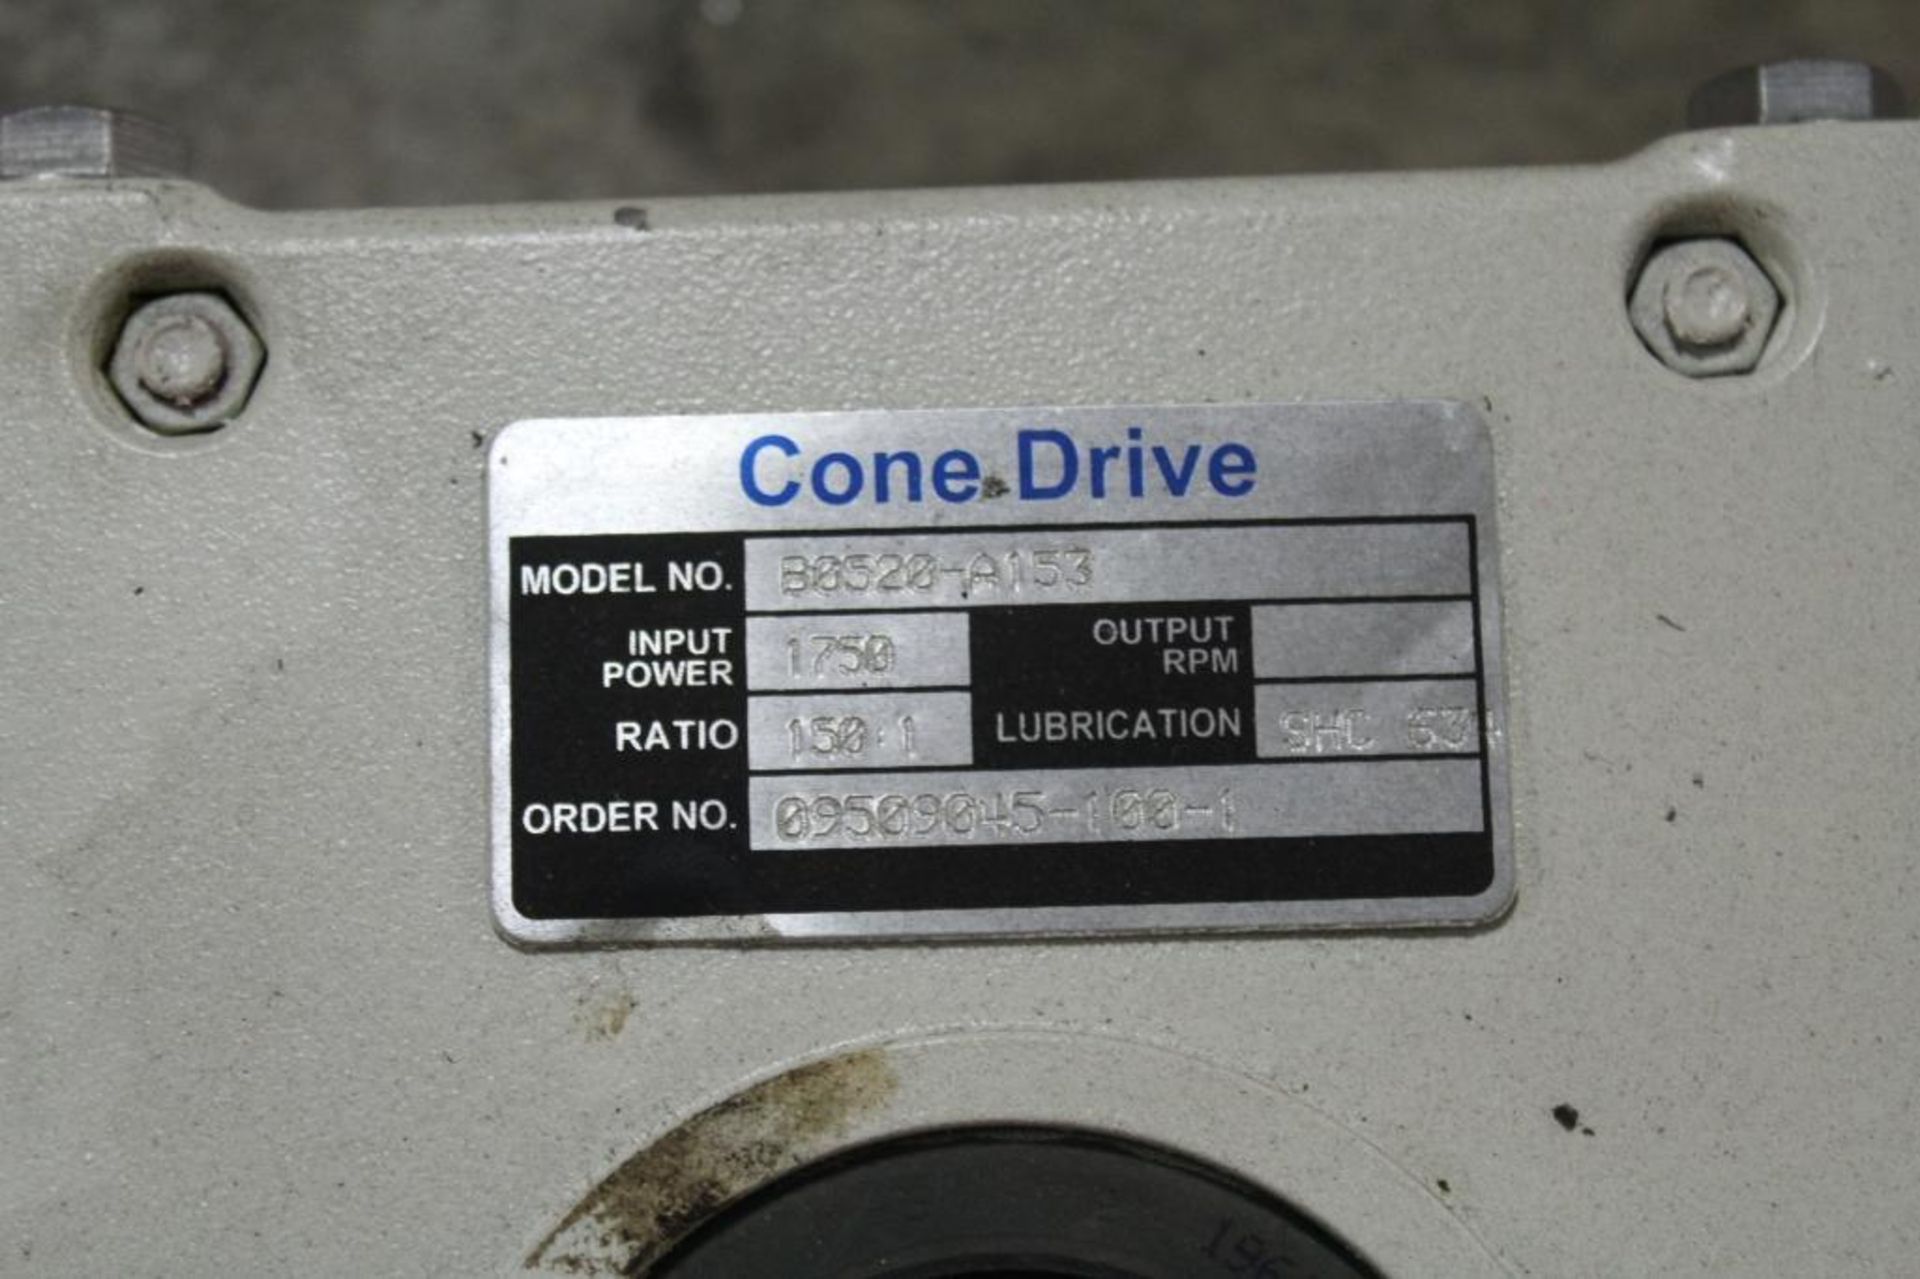 Cone Drive B2520-A153 Worm Drive - Image 2 of 2